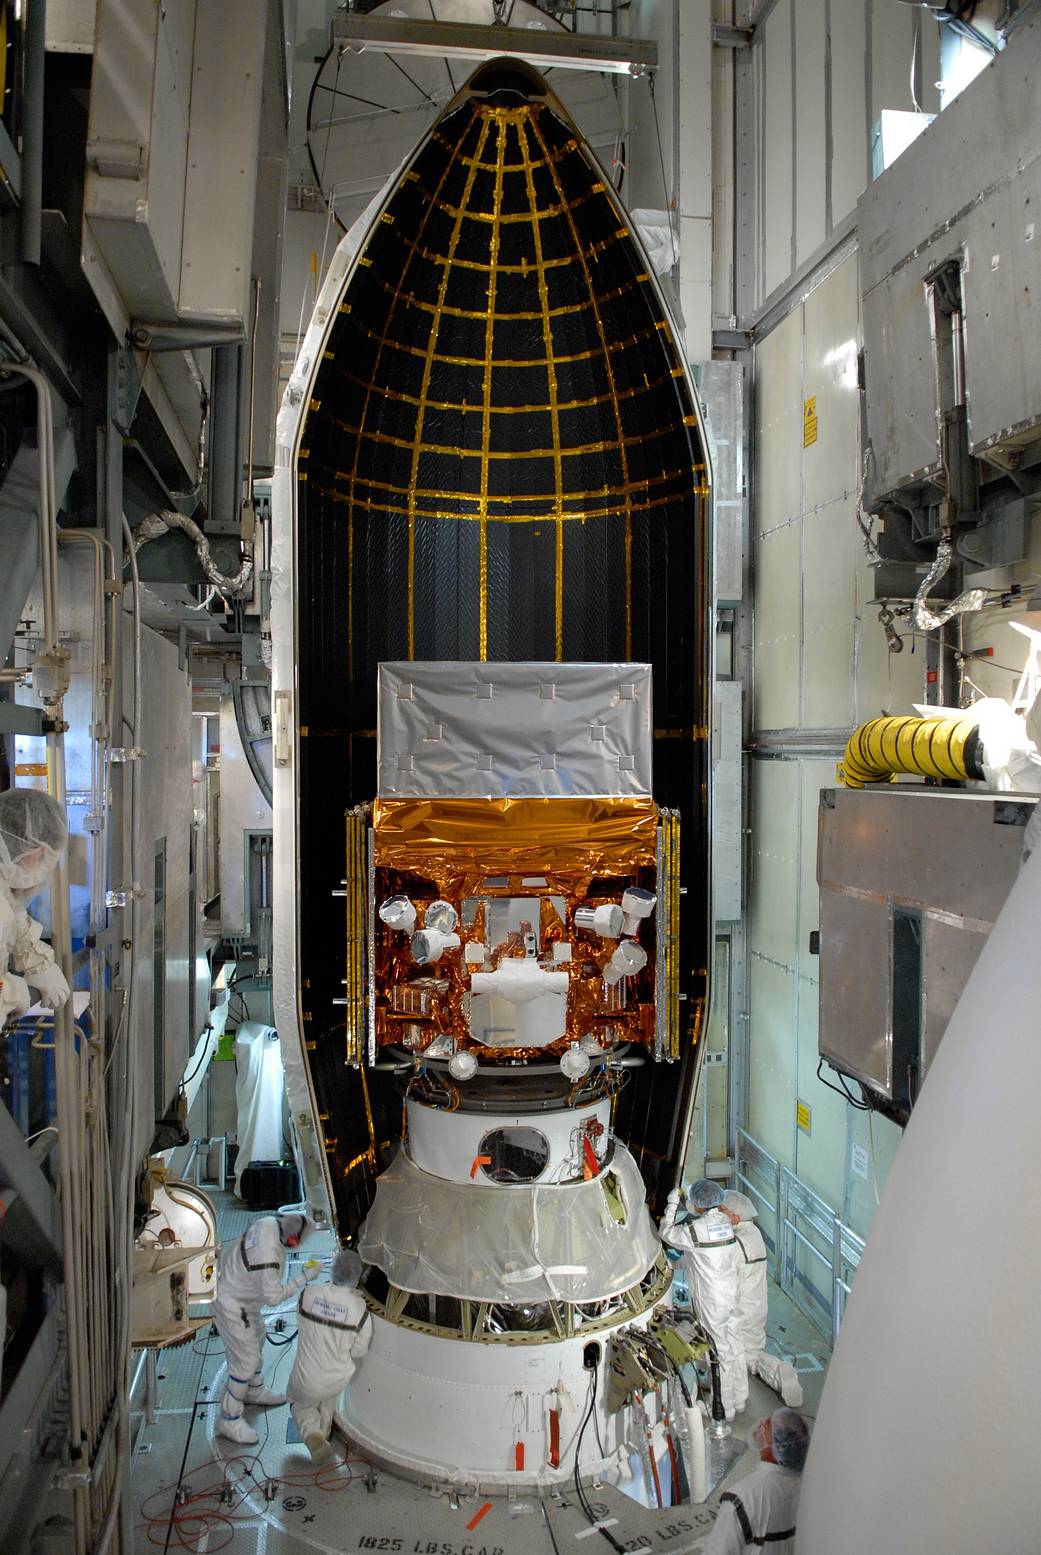 This week in 2008, the Fermi Gamma-ray Space Telescope was launched aboard a Delta II rocket.